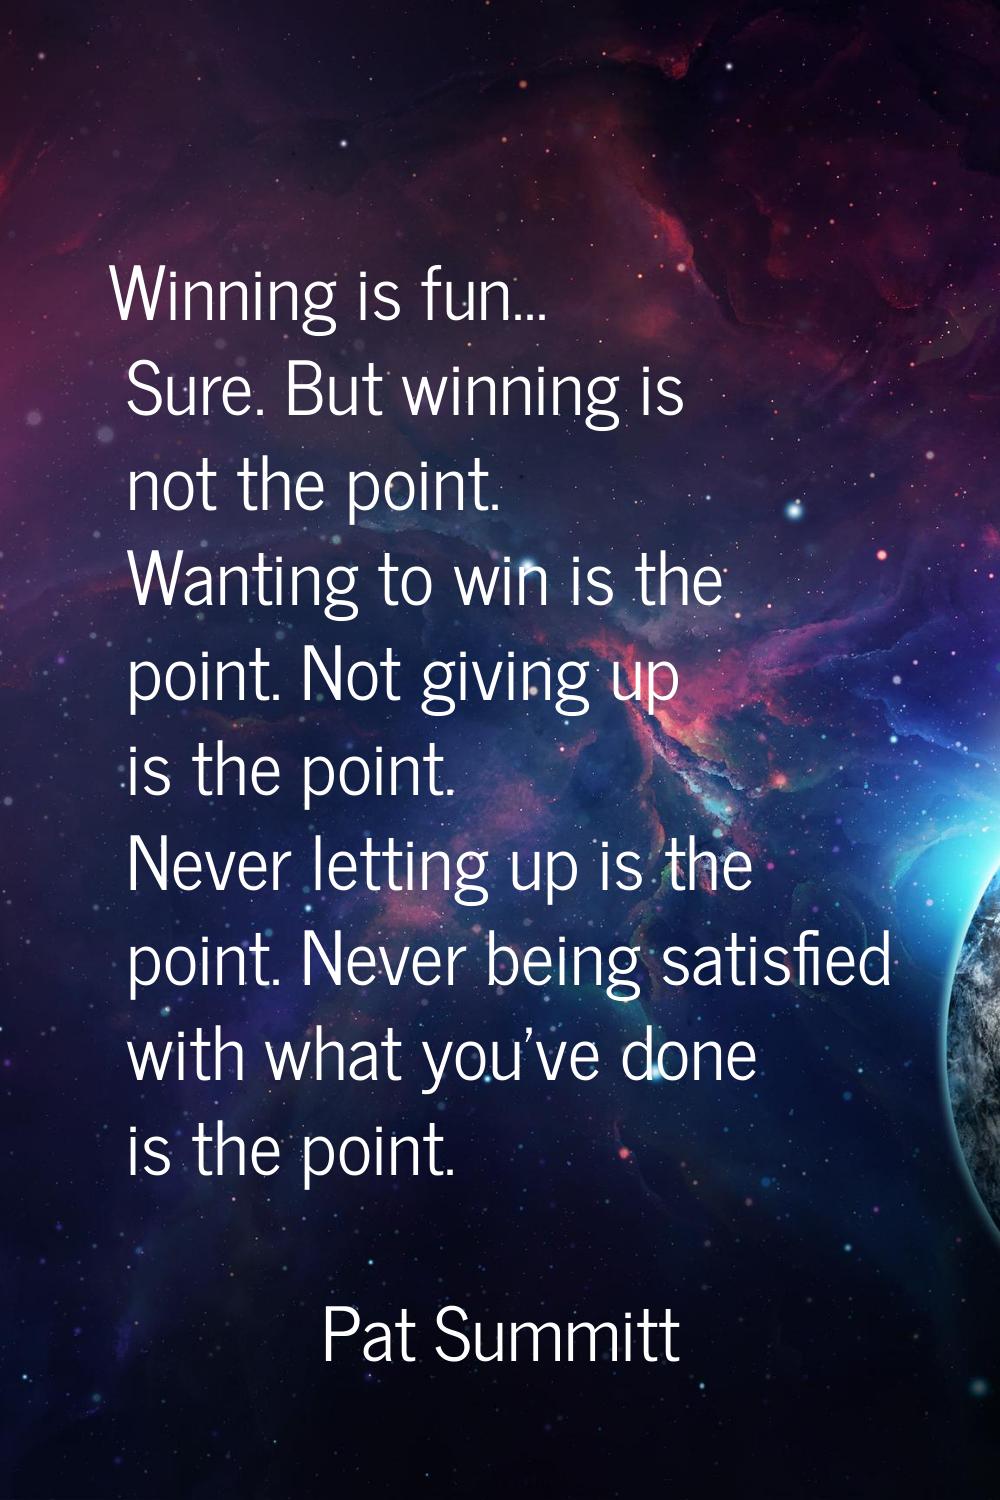 Winning is fun... Sure. But winning is not the point. Wanting to win is the point. Not giving up is